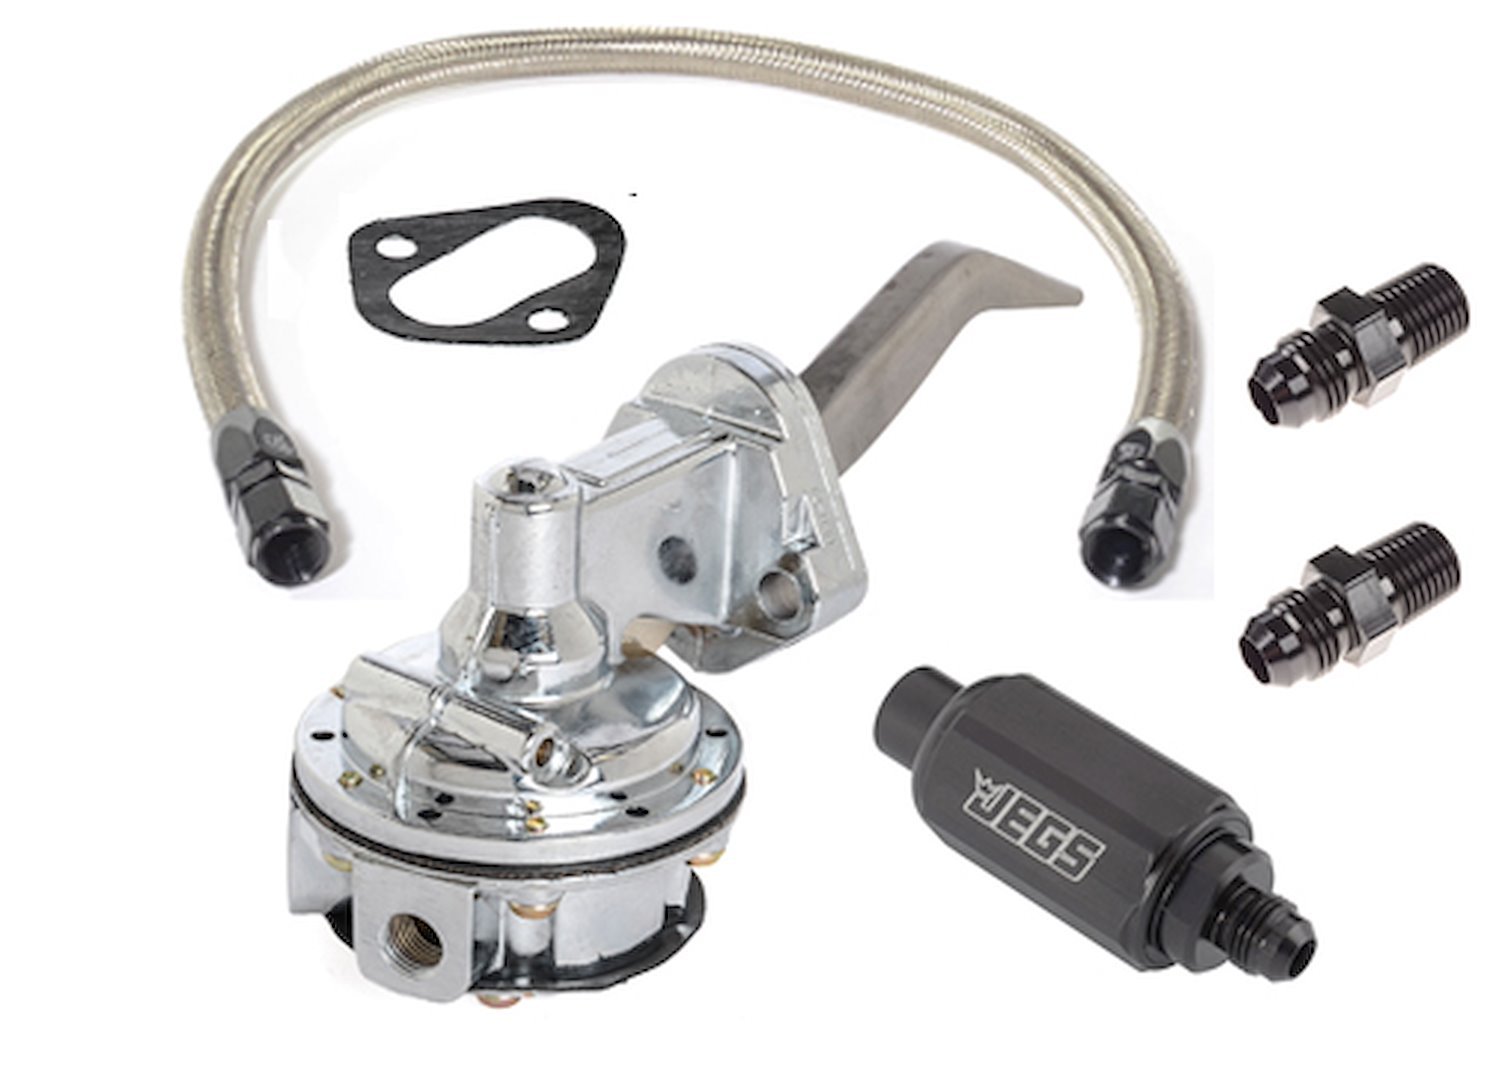 Mechanical Fuel Pump & Installation Kit for Ford 289-302-351W [80 gph, Black Fittings]